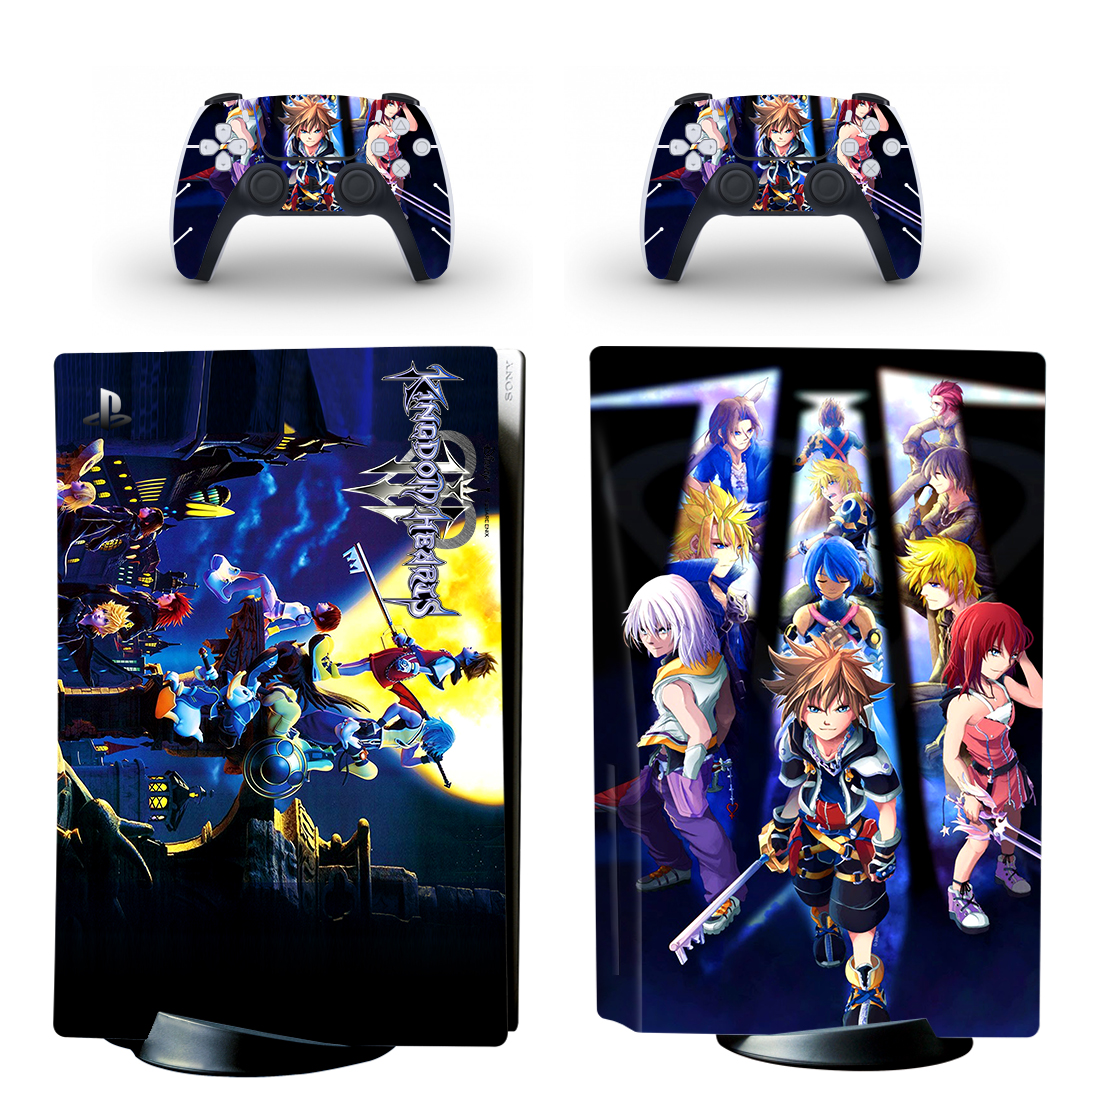 Kingdom Hearts III PS5 Skin Sticker And Controllers Design 4